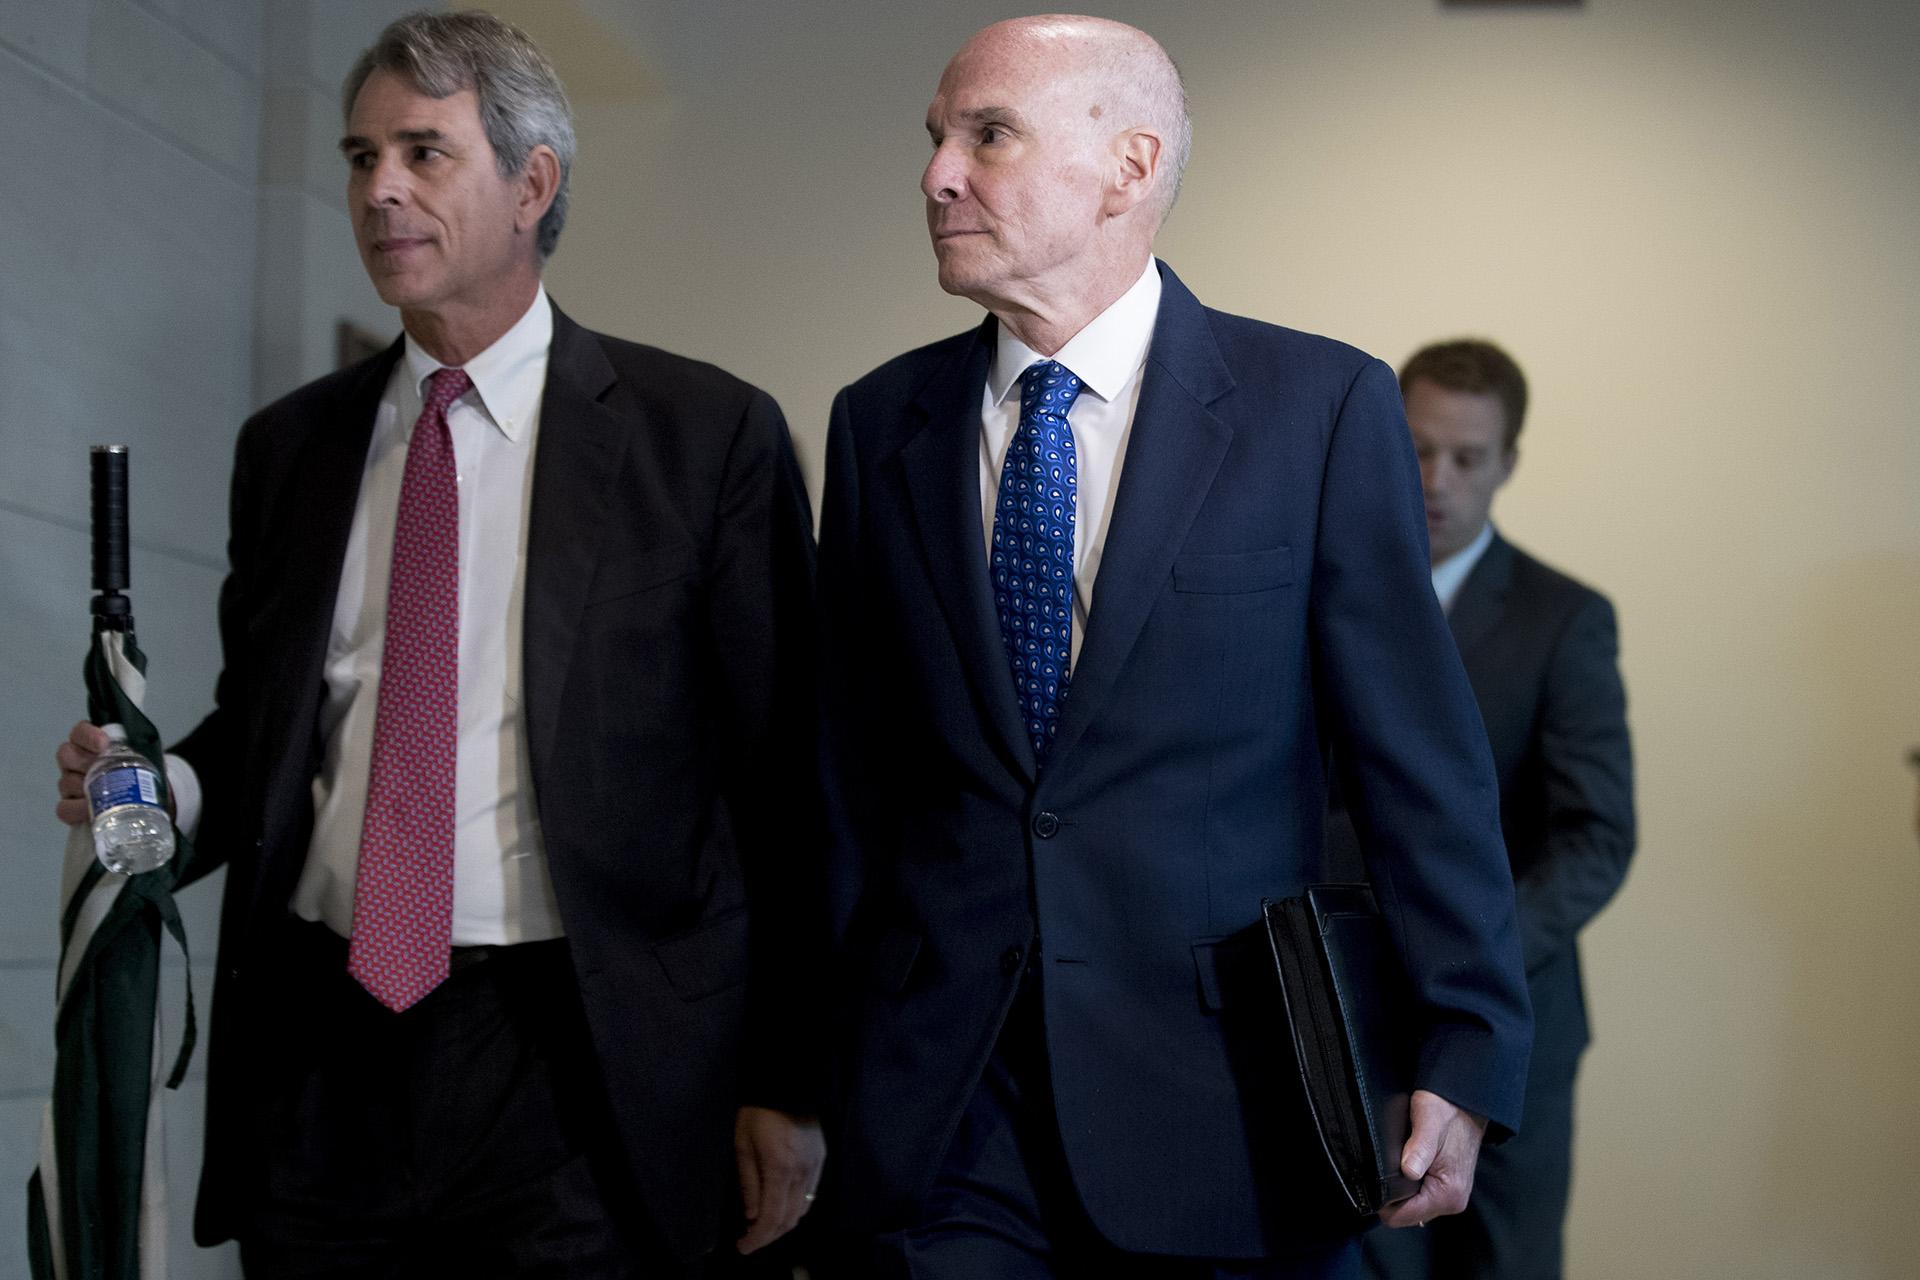 Michael McKinley, a former top aide to Secretary of State Mike Pompeo, right, arrives on Capitol Hill in Washington, Wednesday, Oct. 16, 2019, to testify before congressional lawmakers as part of the House impeachment inquiry into President Donald Trump. (AP Photo / Andrew Harnik)